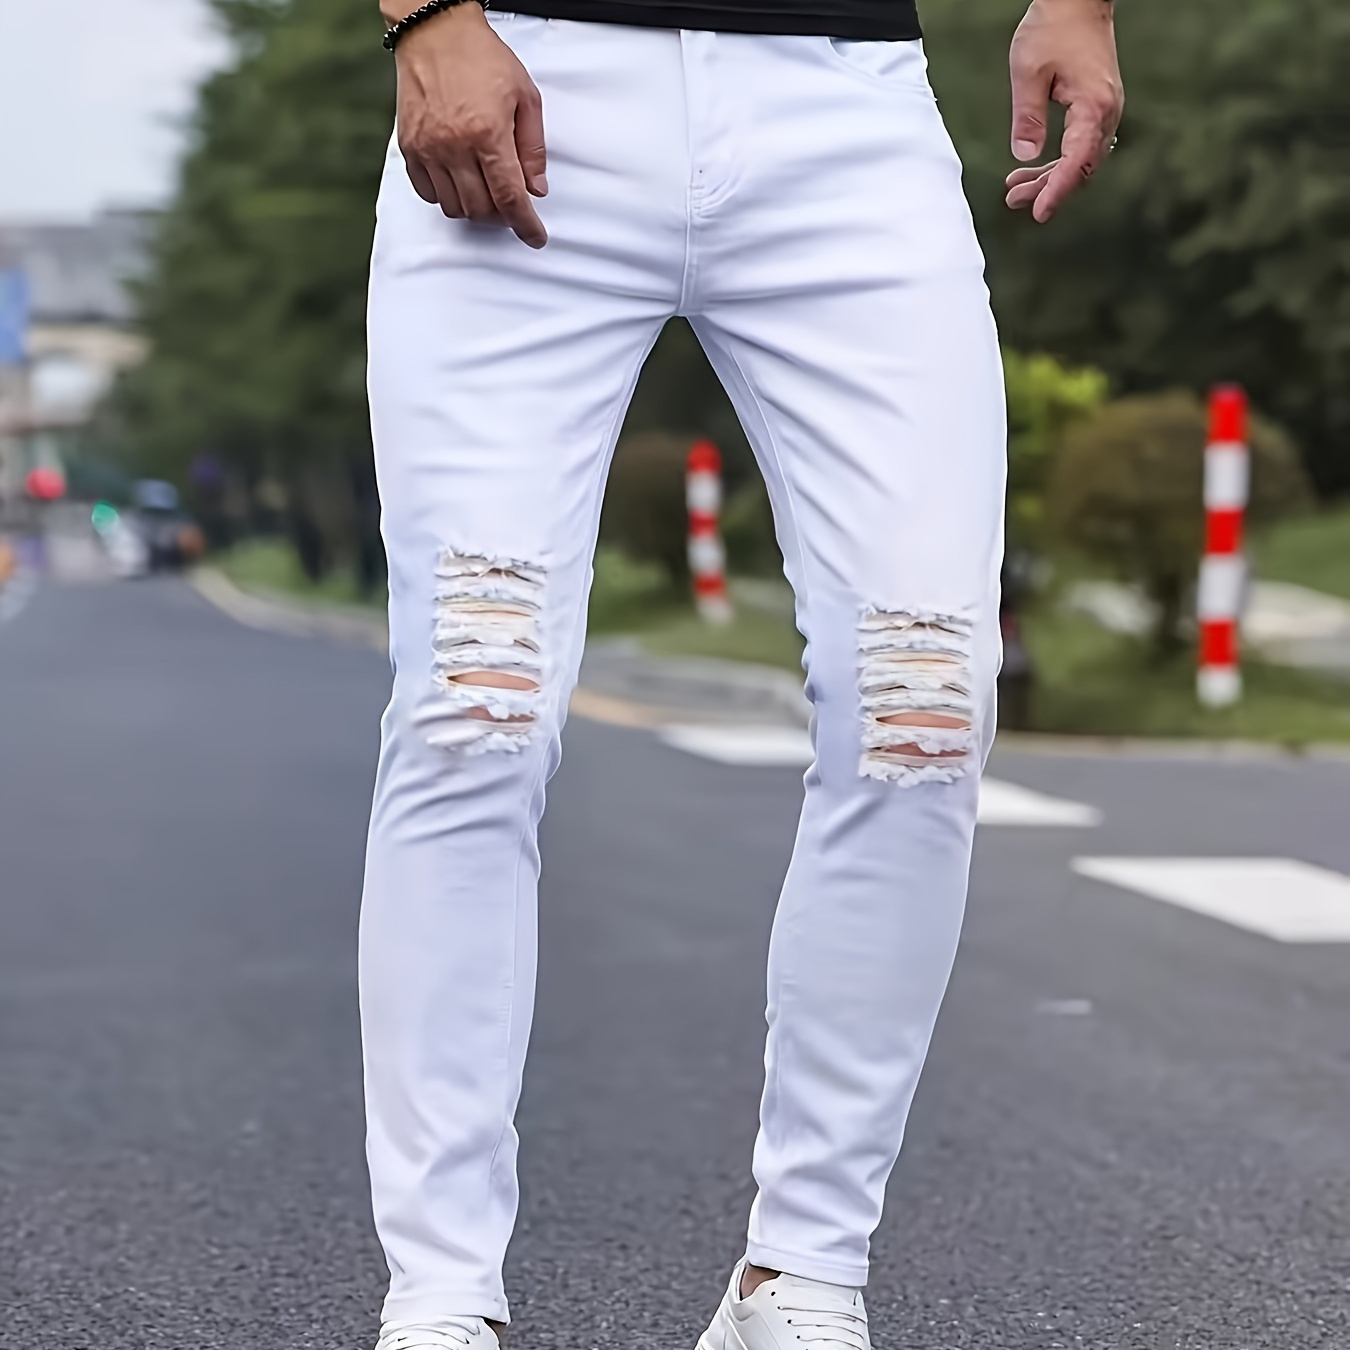 

Men's Solid Cotton Blend Ripped Distressed Jeans, Chic Street Style Slim Fit Bottoms For Men, All Seasons